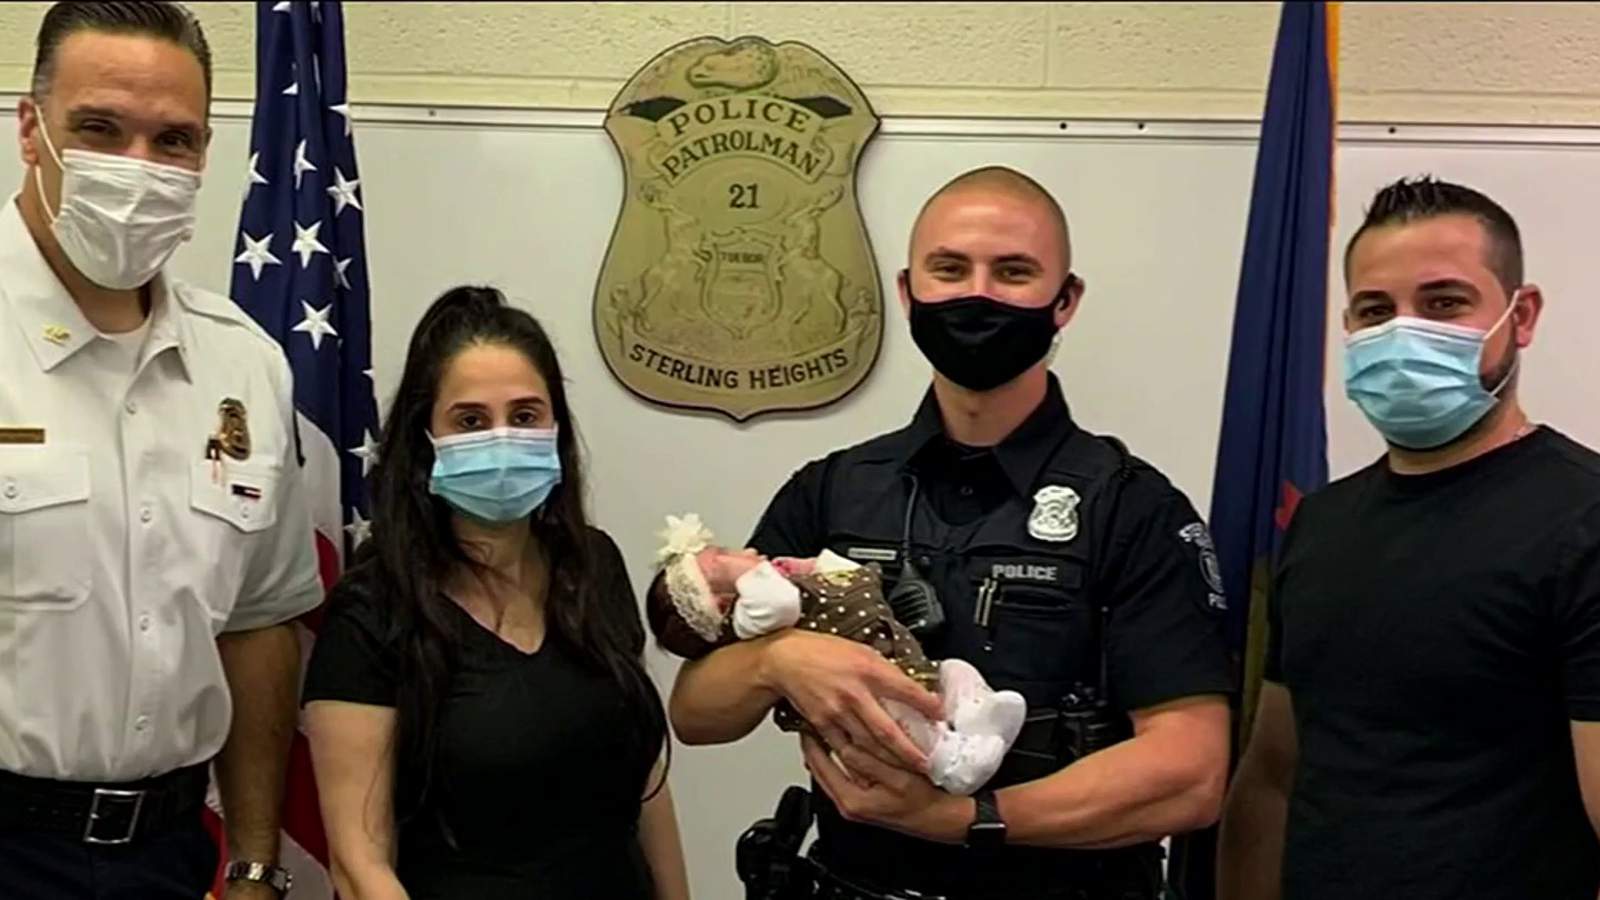 3 weeks old and choking: Officer saves the day